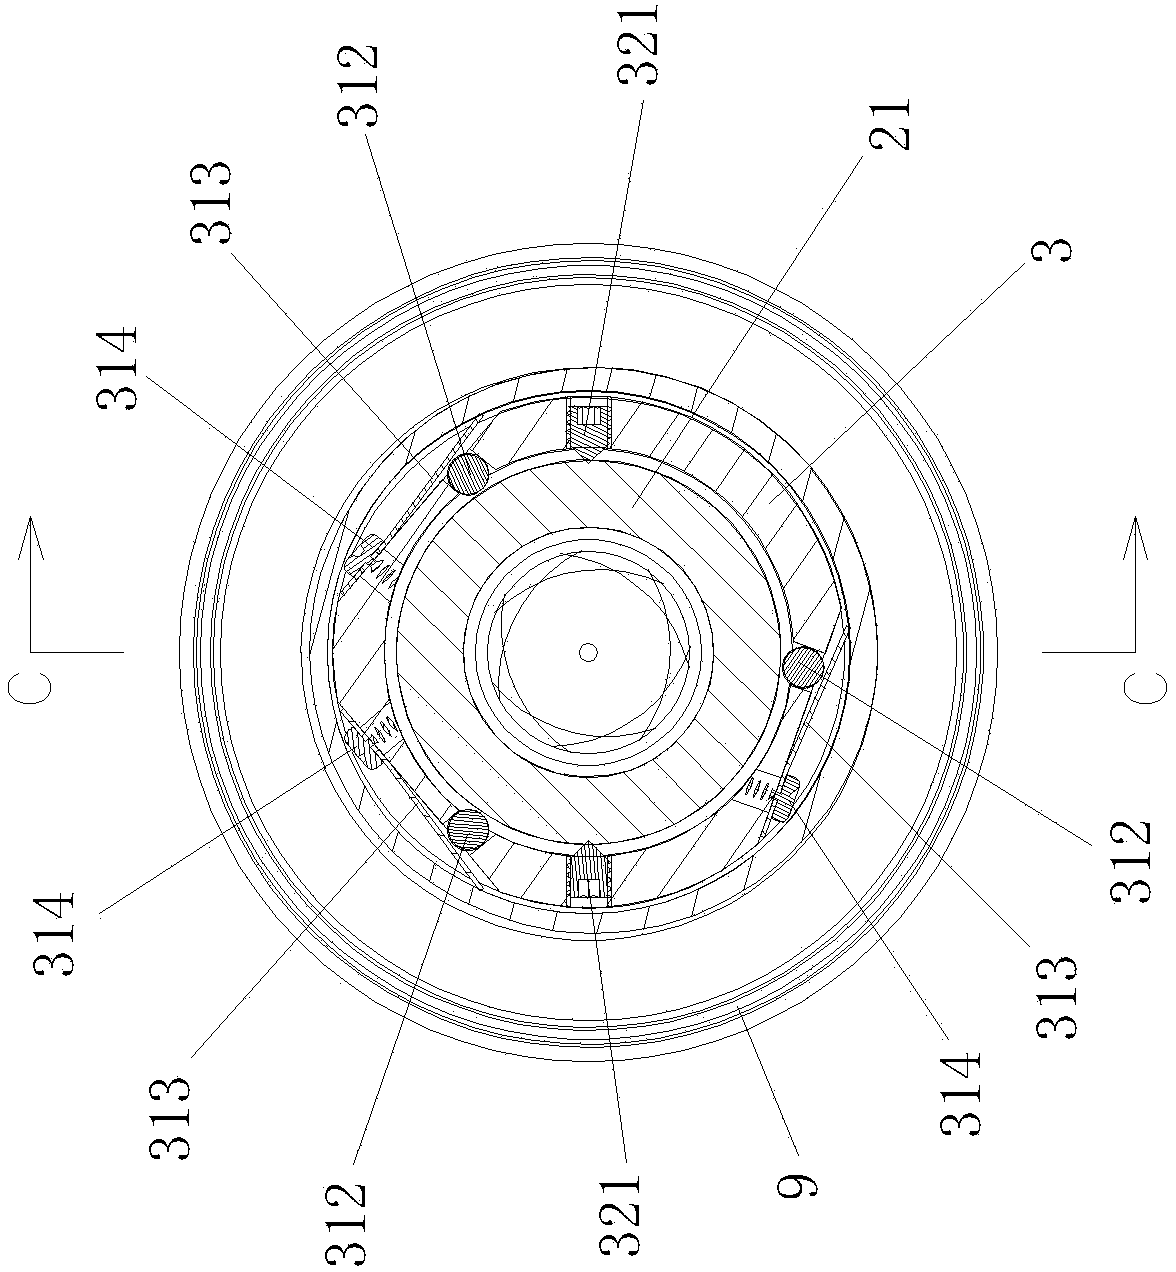 Lens adjustable in coaxiality of front lens group and rear lens group